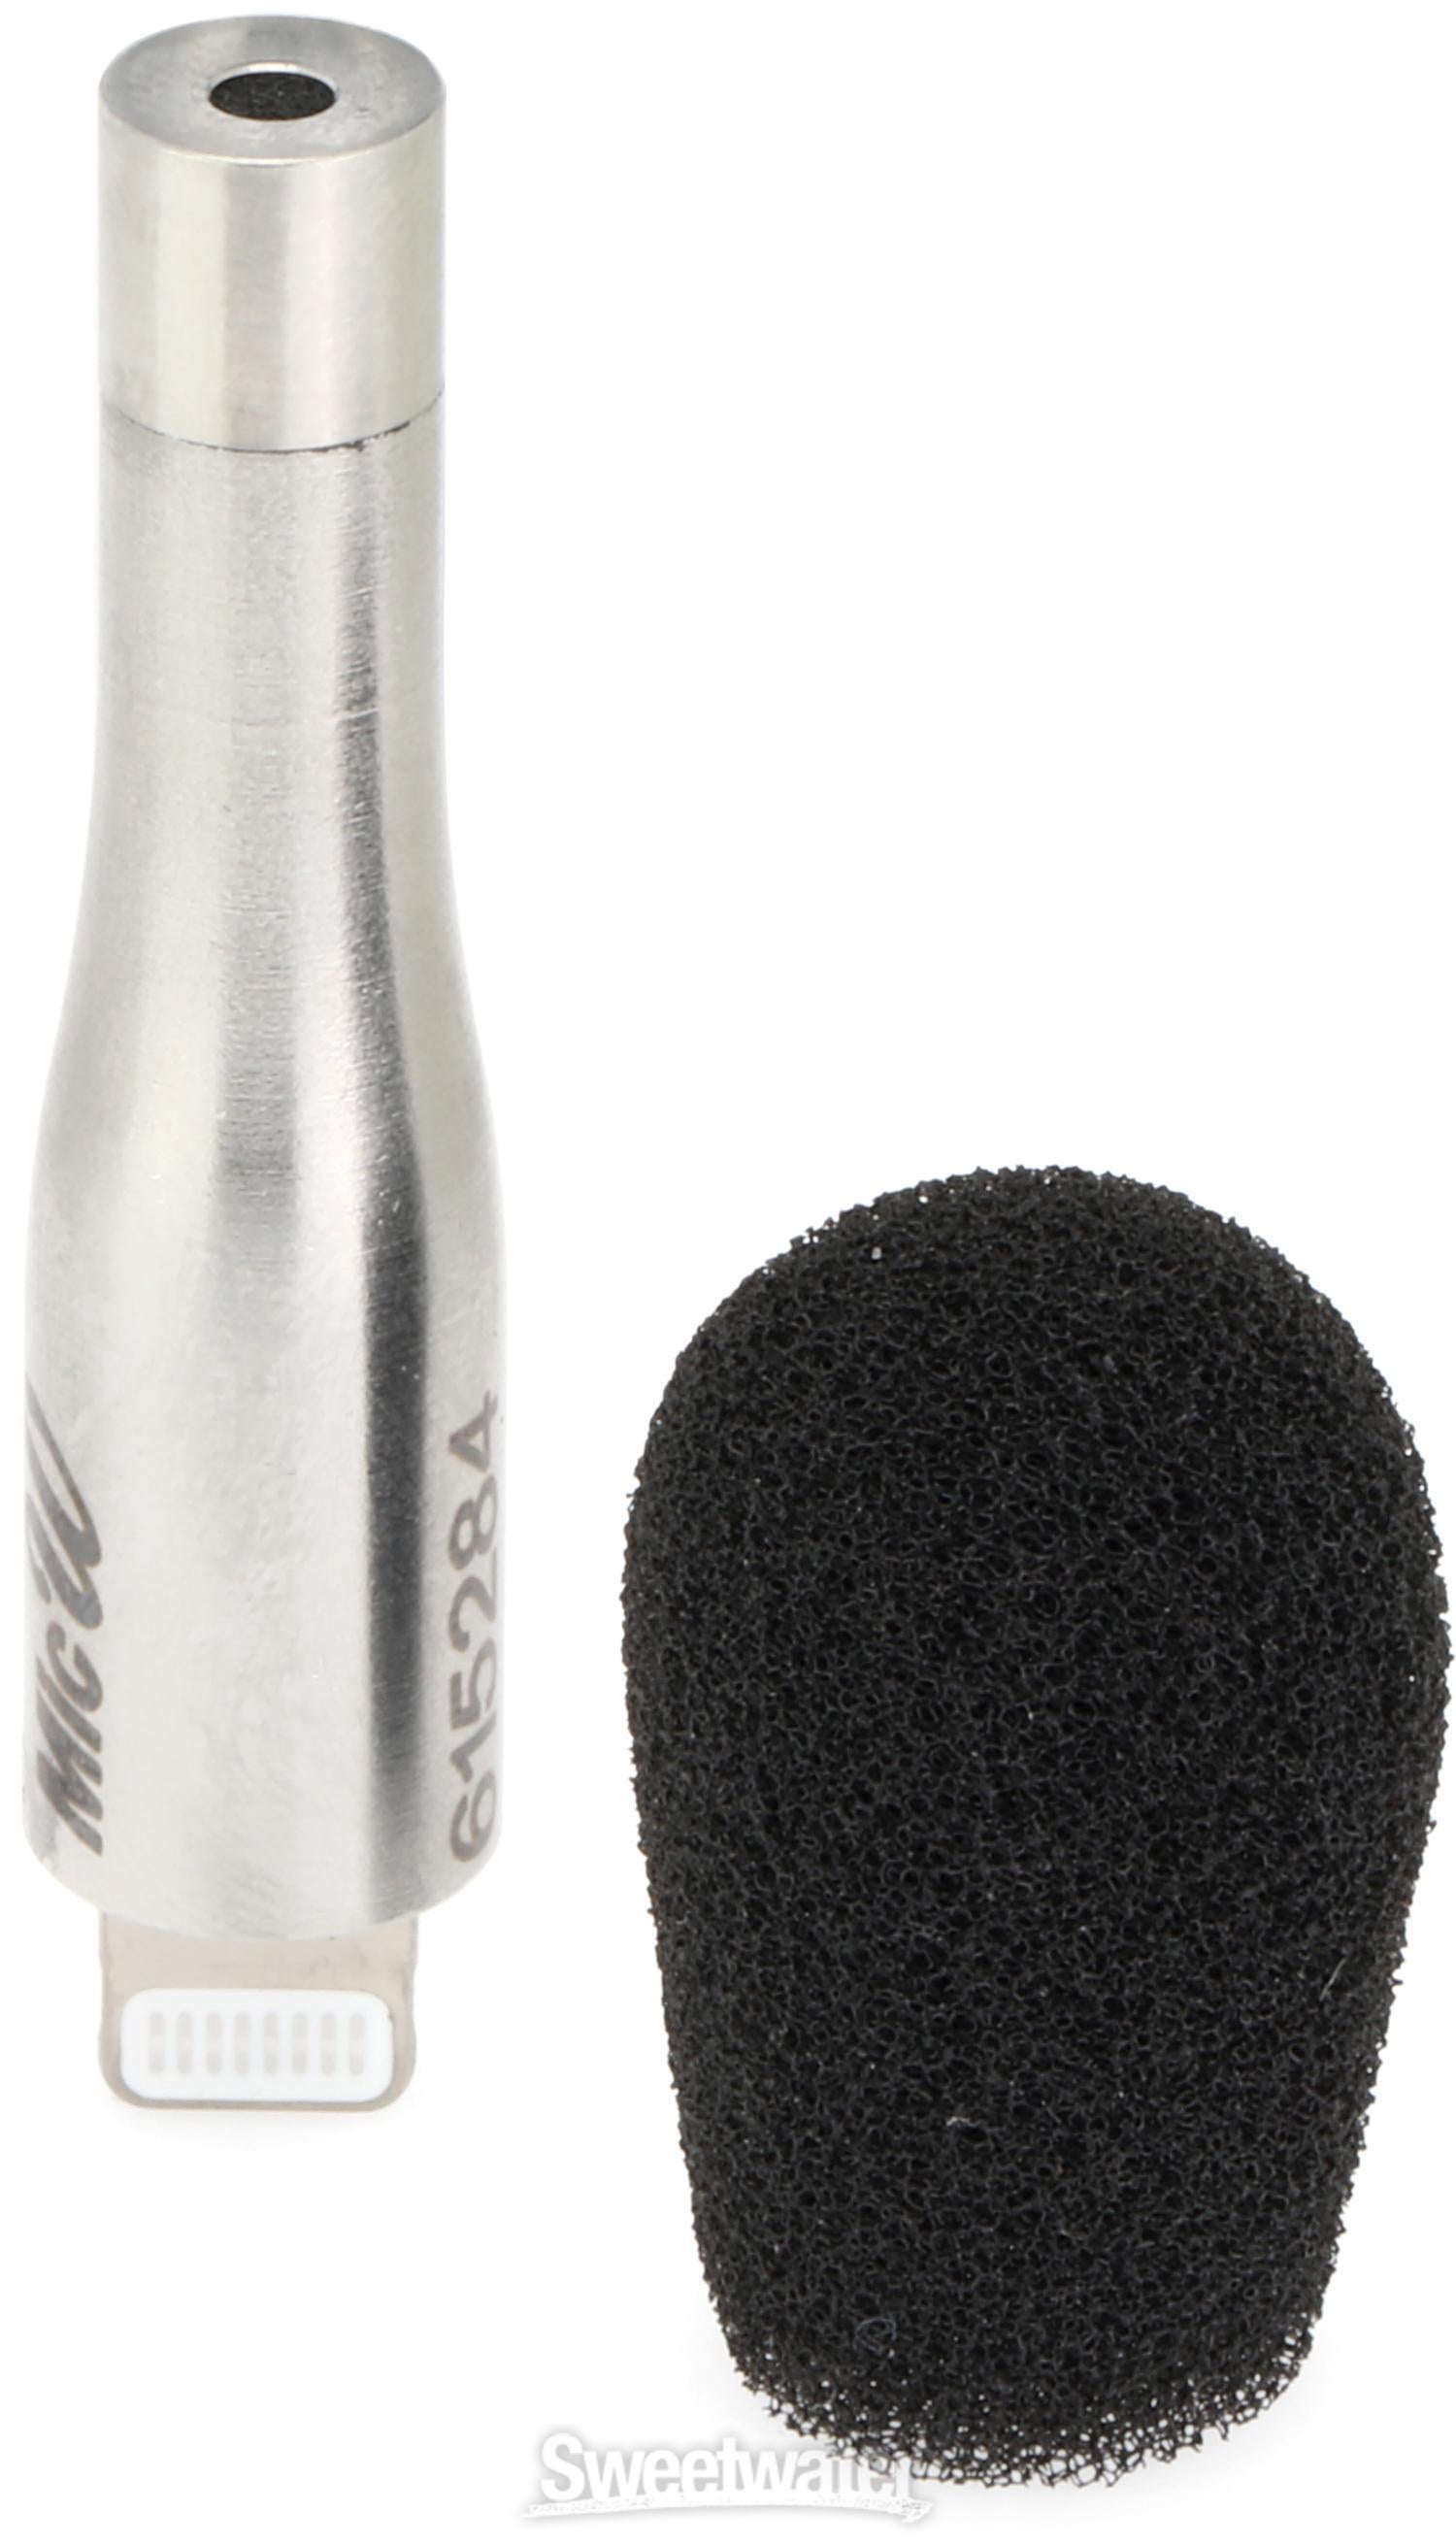 MicW i437L Omnidirectional Lightning Microphone | Sweetwater